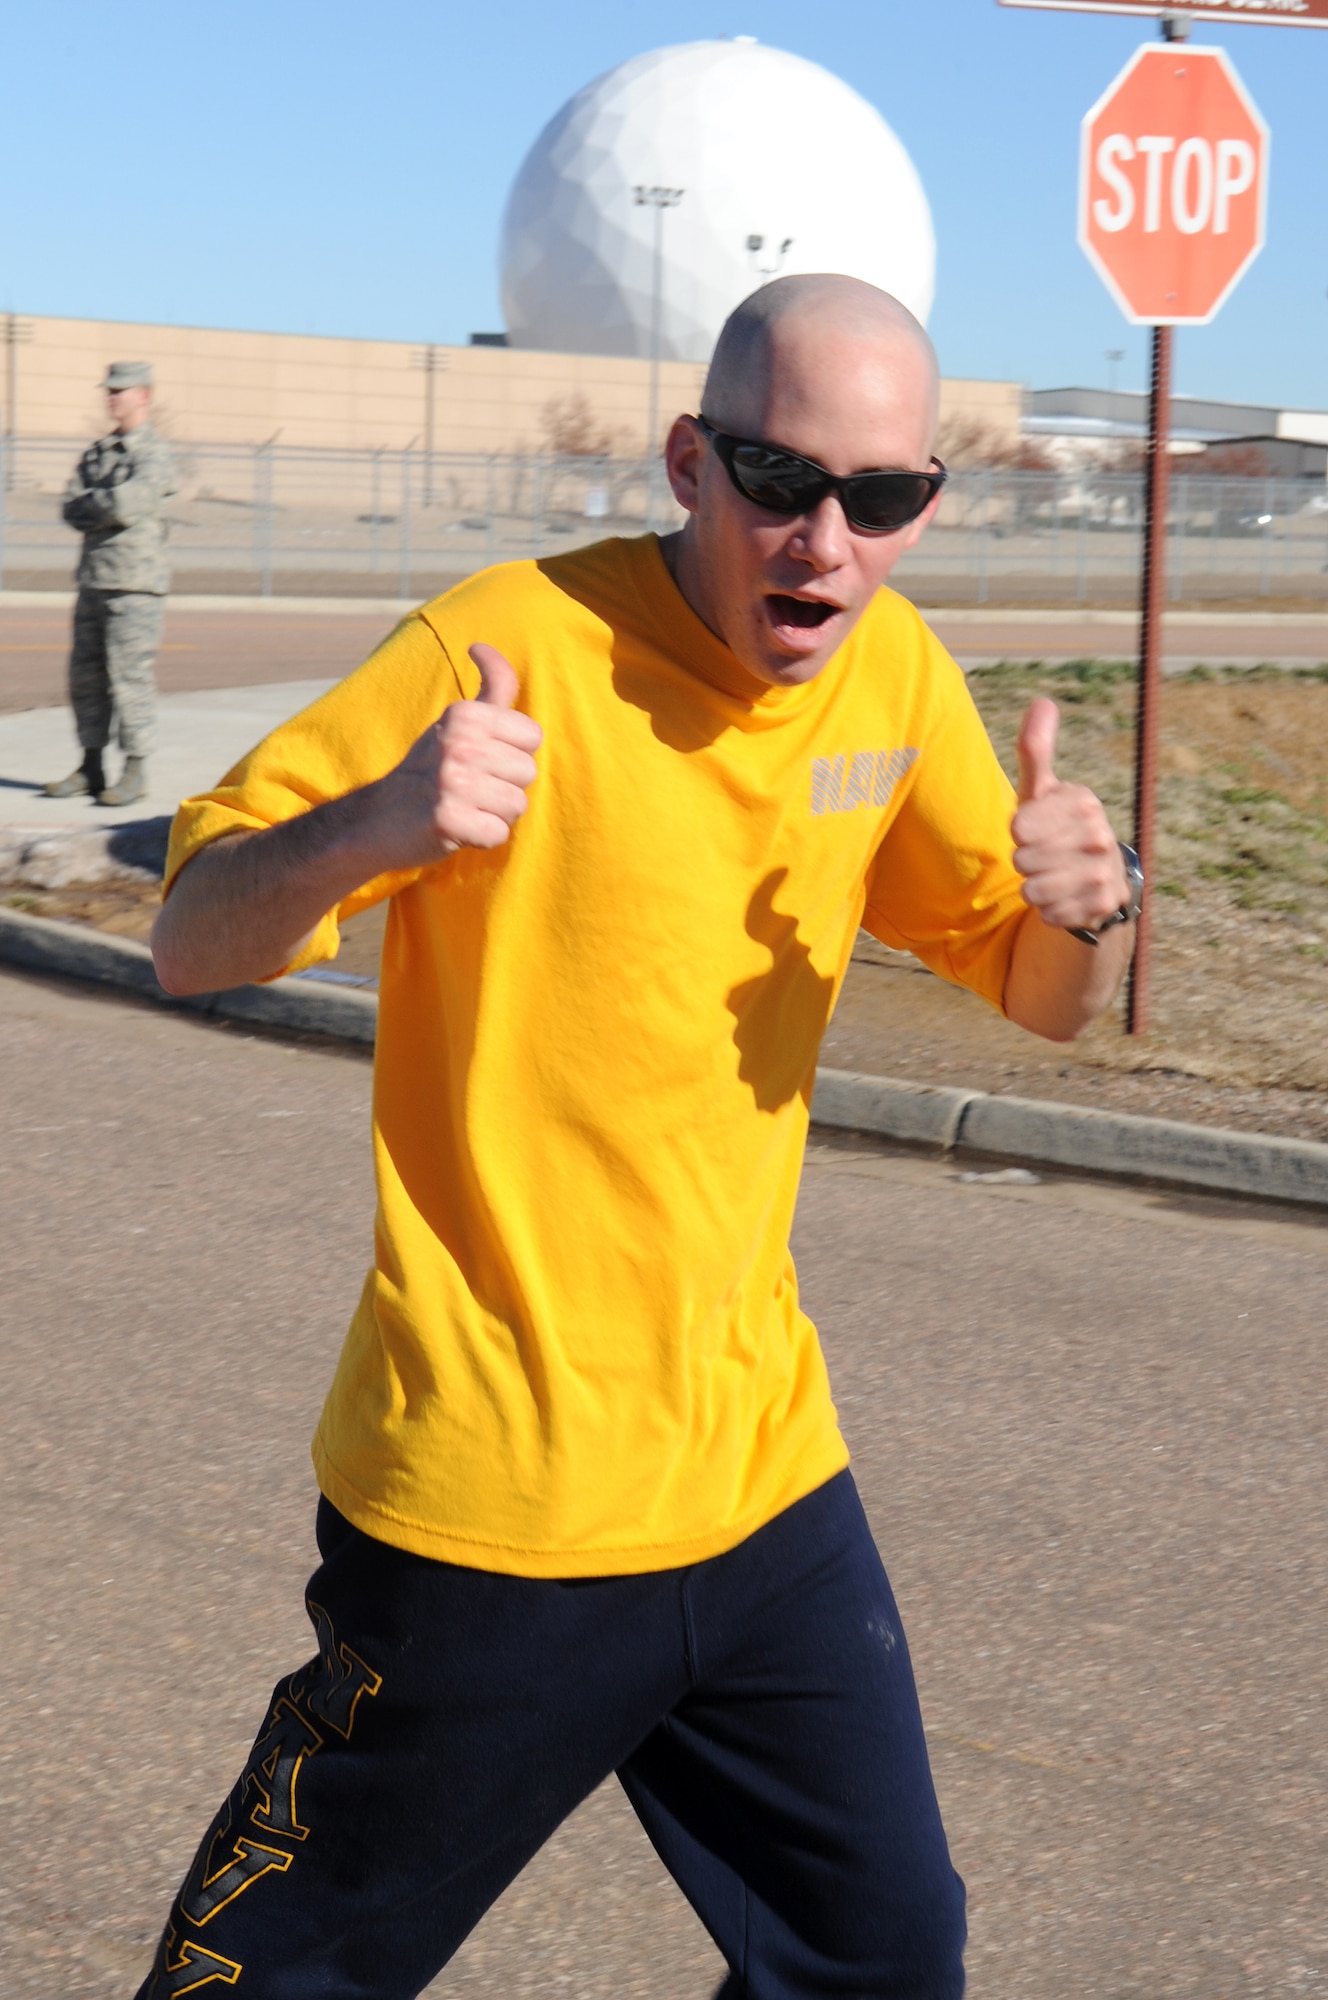 BUCKLEY AIR FORCE BASE, Colo. -- Navy Petty Officer 3rd Class Shawn Longa gives a thumbs-up during the Turkey Trot Nov. 18. First-place winners were awarded a free turkey. (U.S. Air Force photo by Airman First Class Marcy Glass)